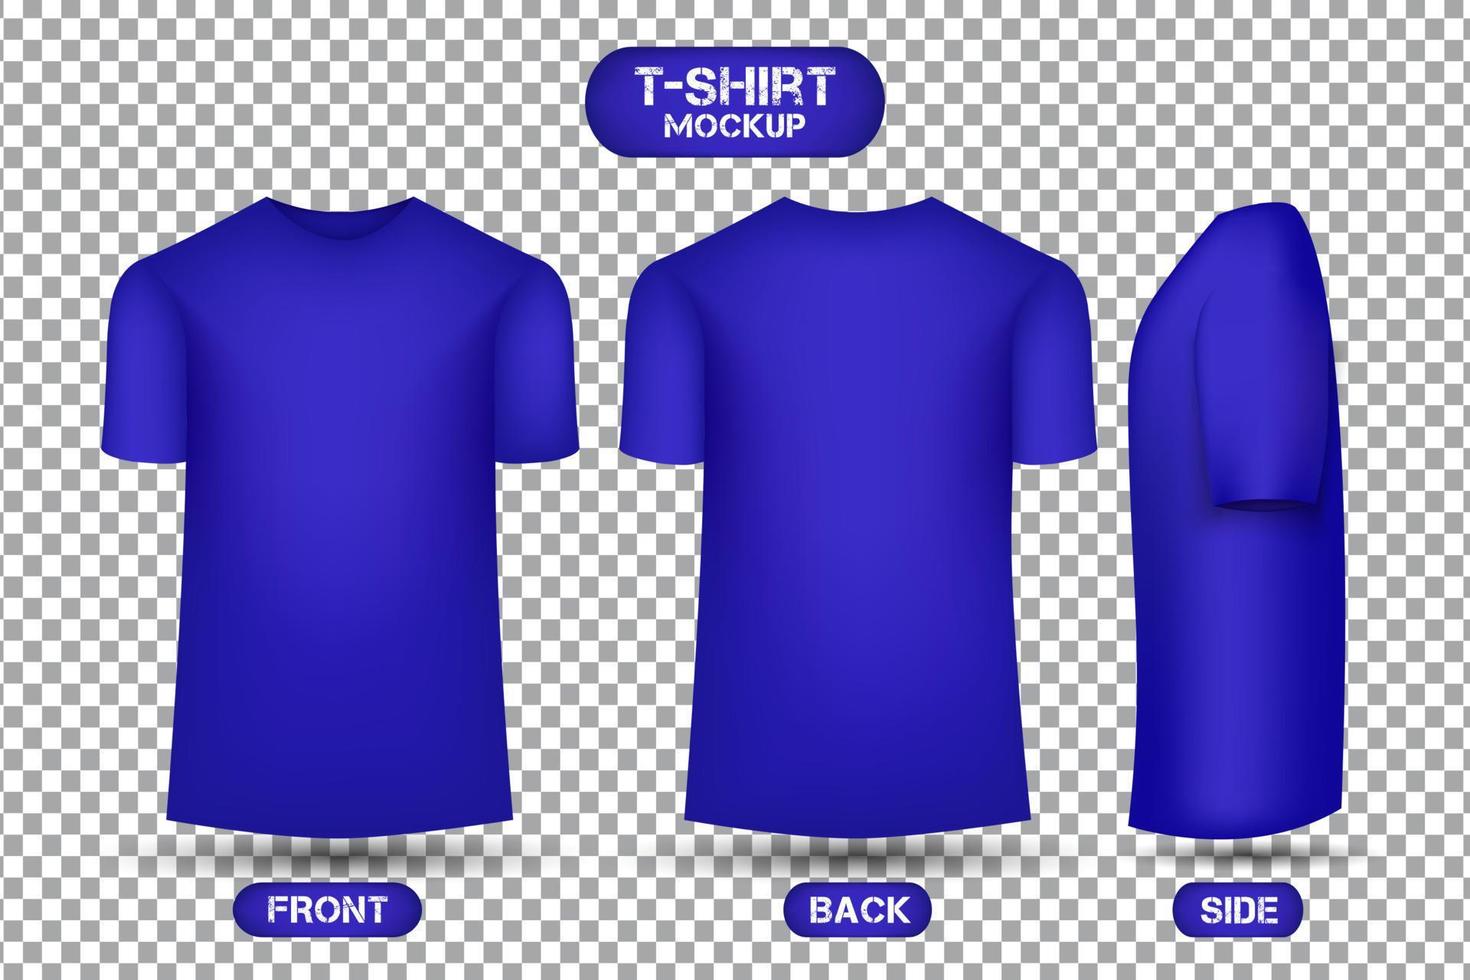 plain blue t-shirt design, with front, back and side view, 3d style t-shirt mockup vector